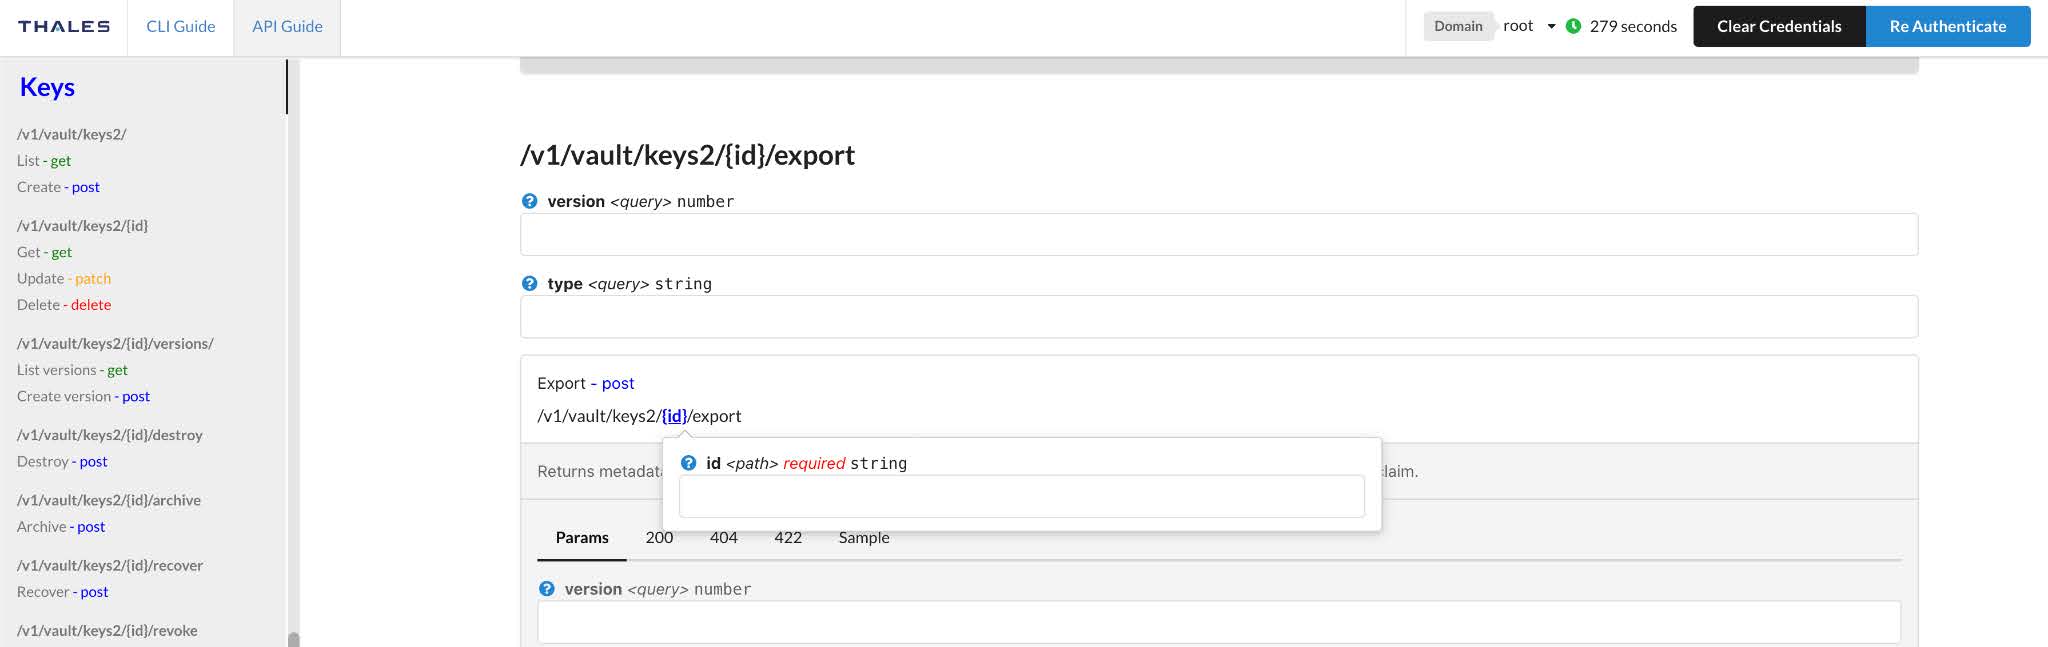 The Export POST in the Thales API Guide.